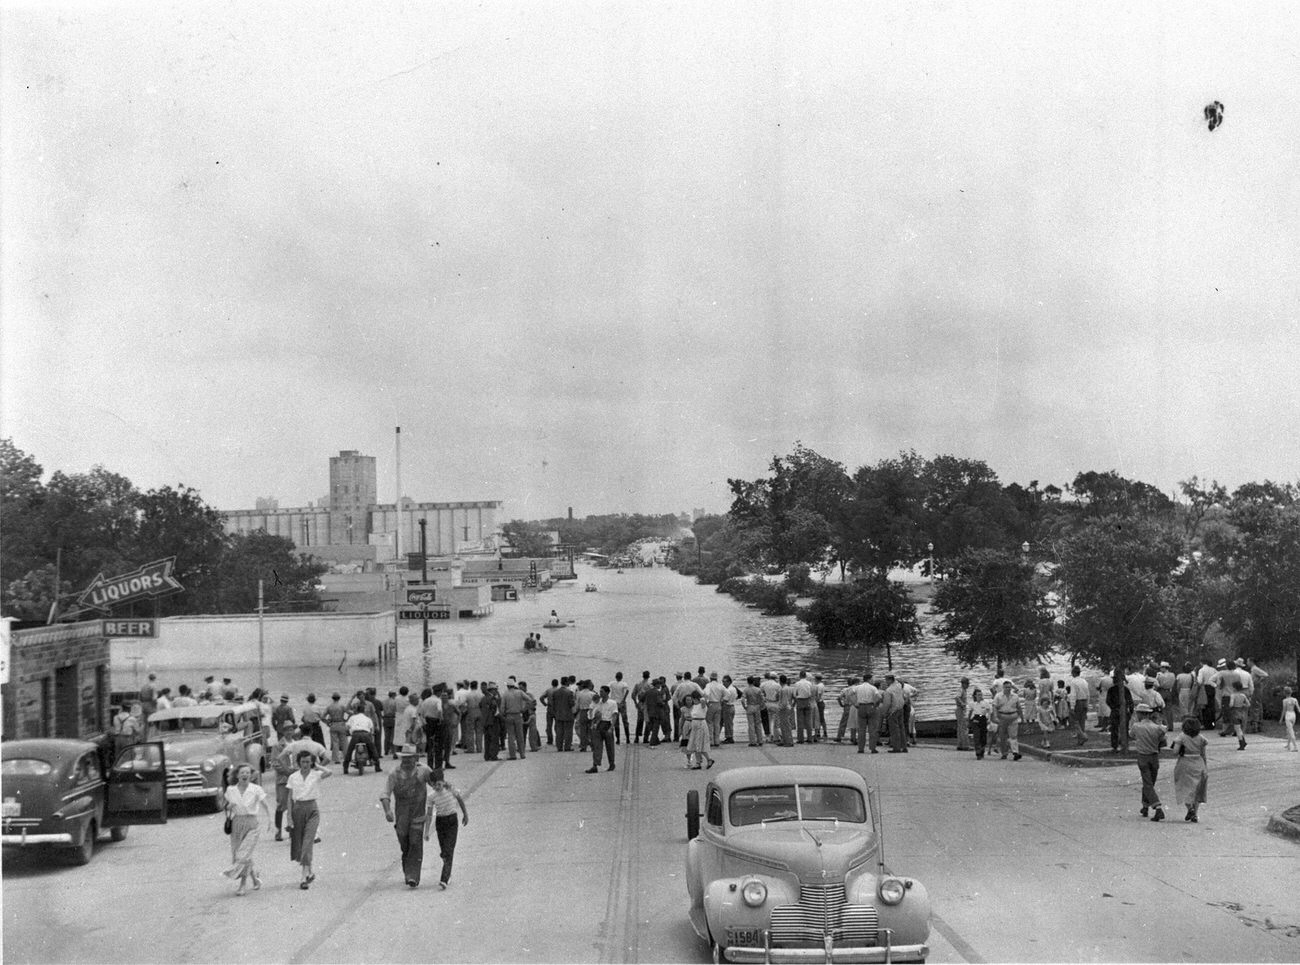 People lining street at water's edge during flood, 1949